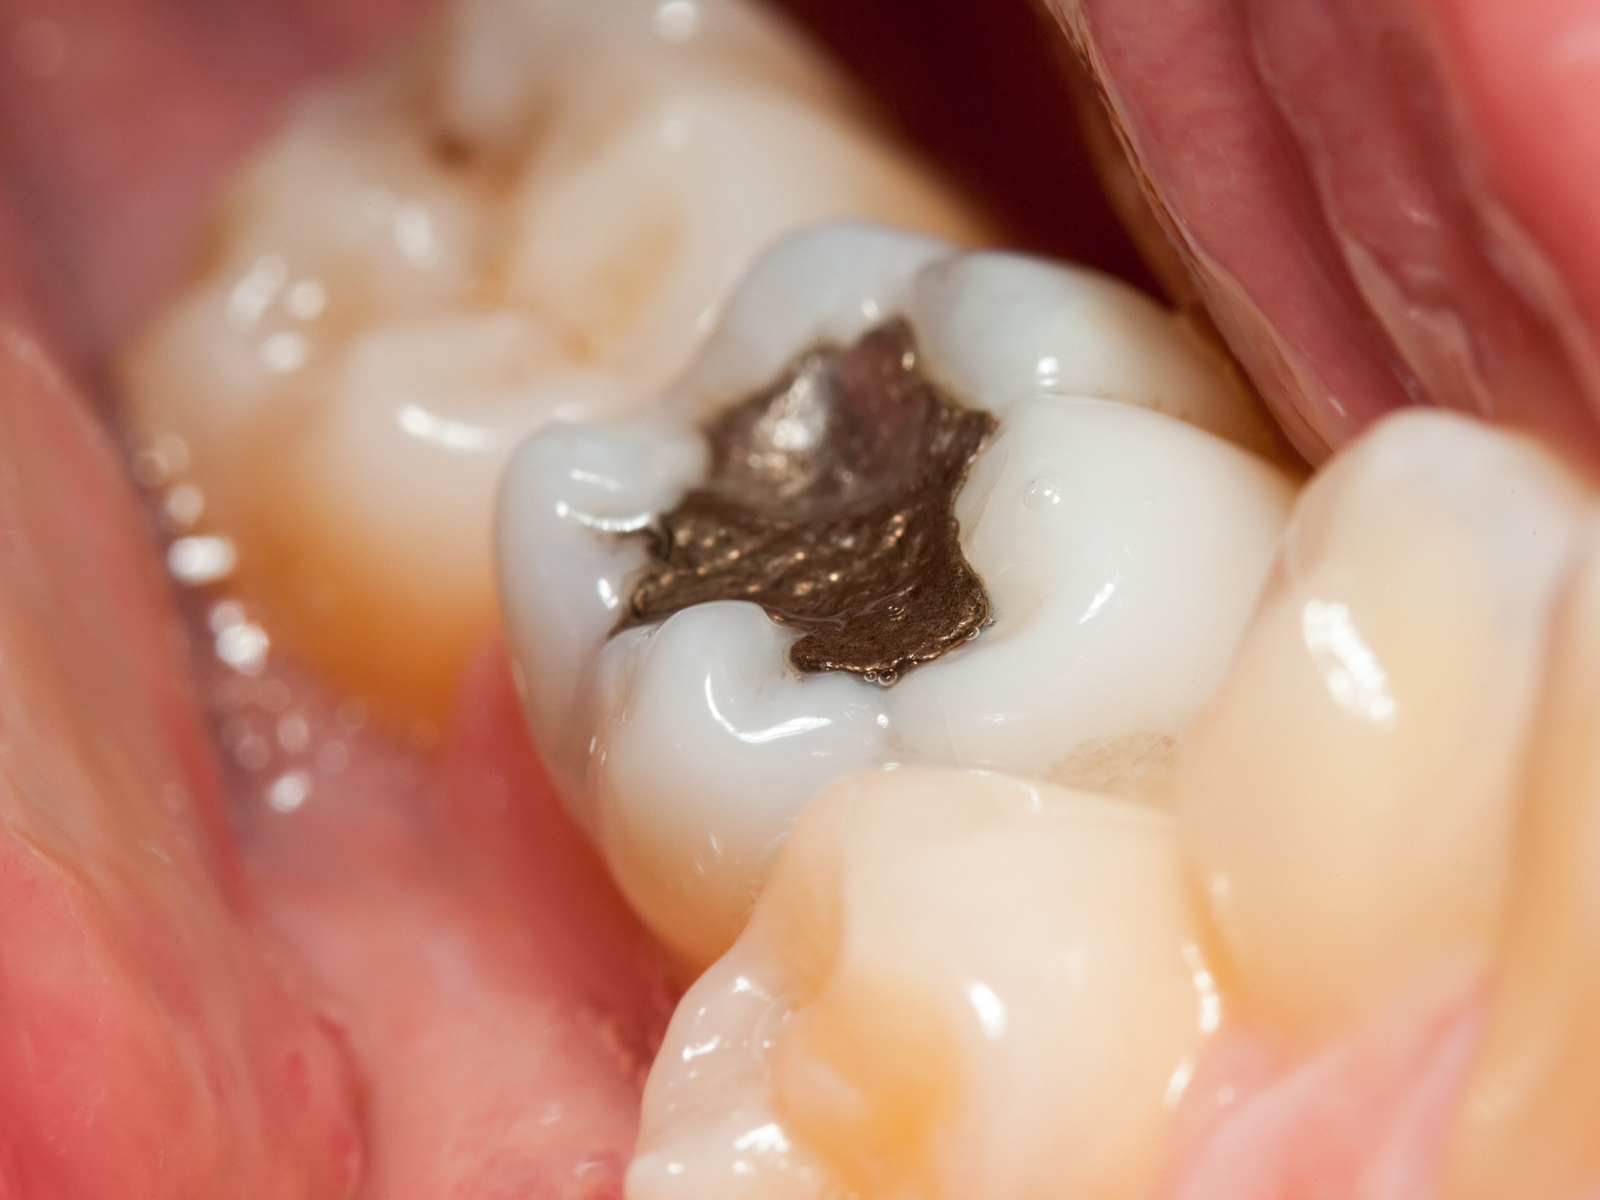 What should you know about dental health and tooth fillings?